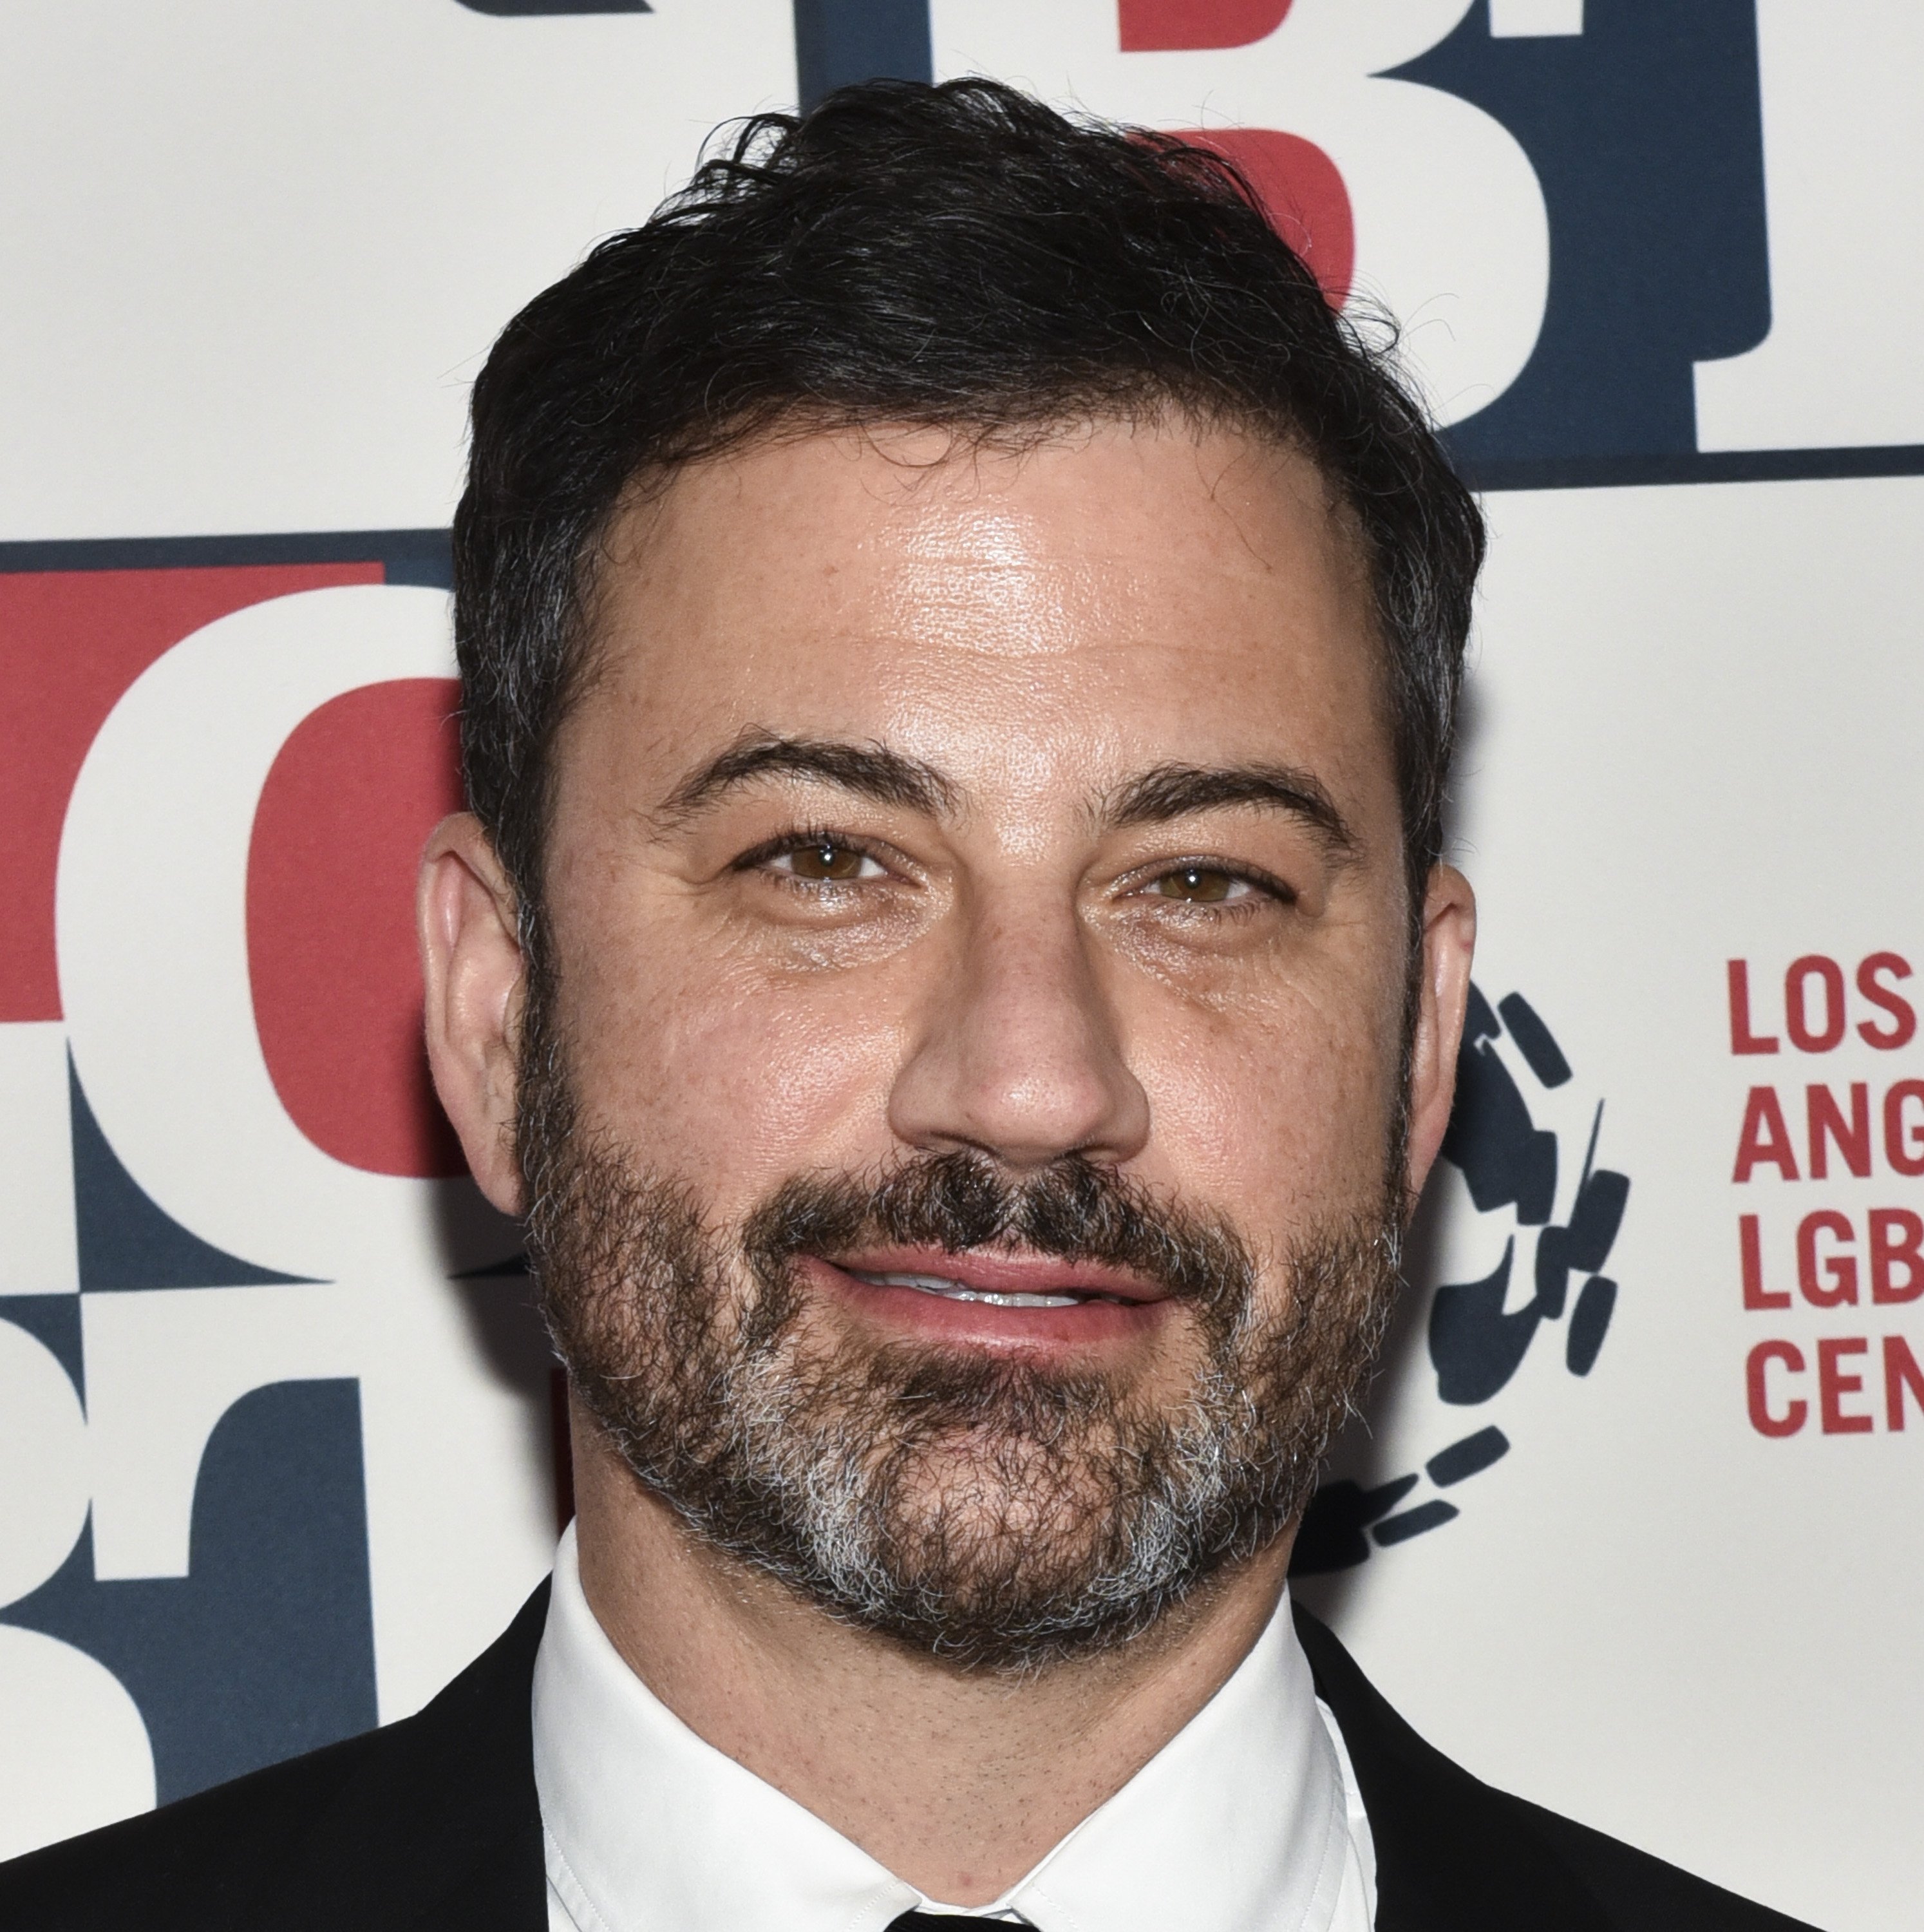 immy Kimmel attends Los Angeles LGBT Center's 48th Anniversary Gala Vanguard Awards at The Beverly Hilton Hotel on September 23, 2017. | Source: Getty Images